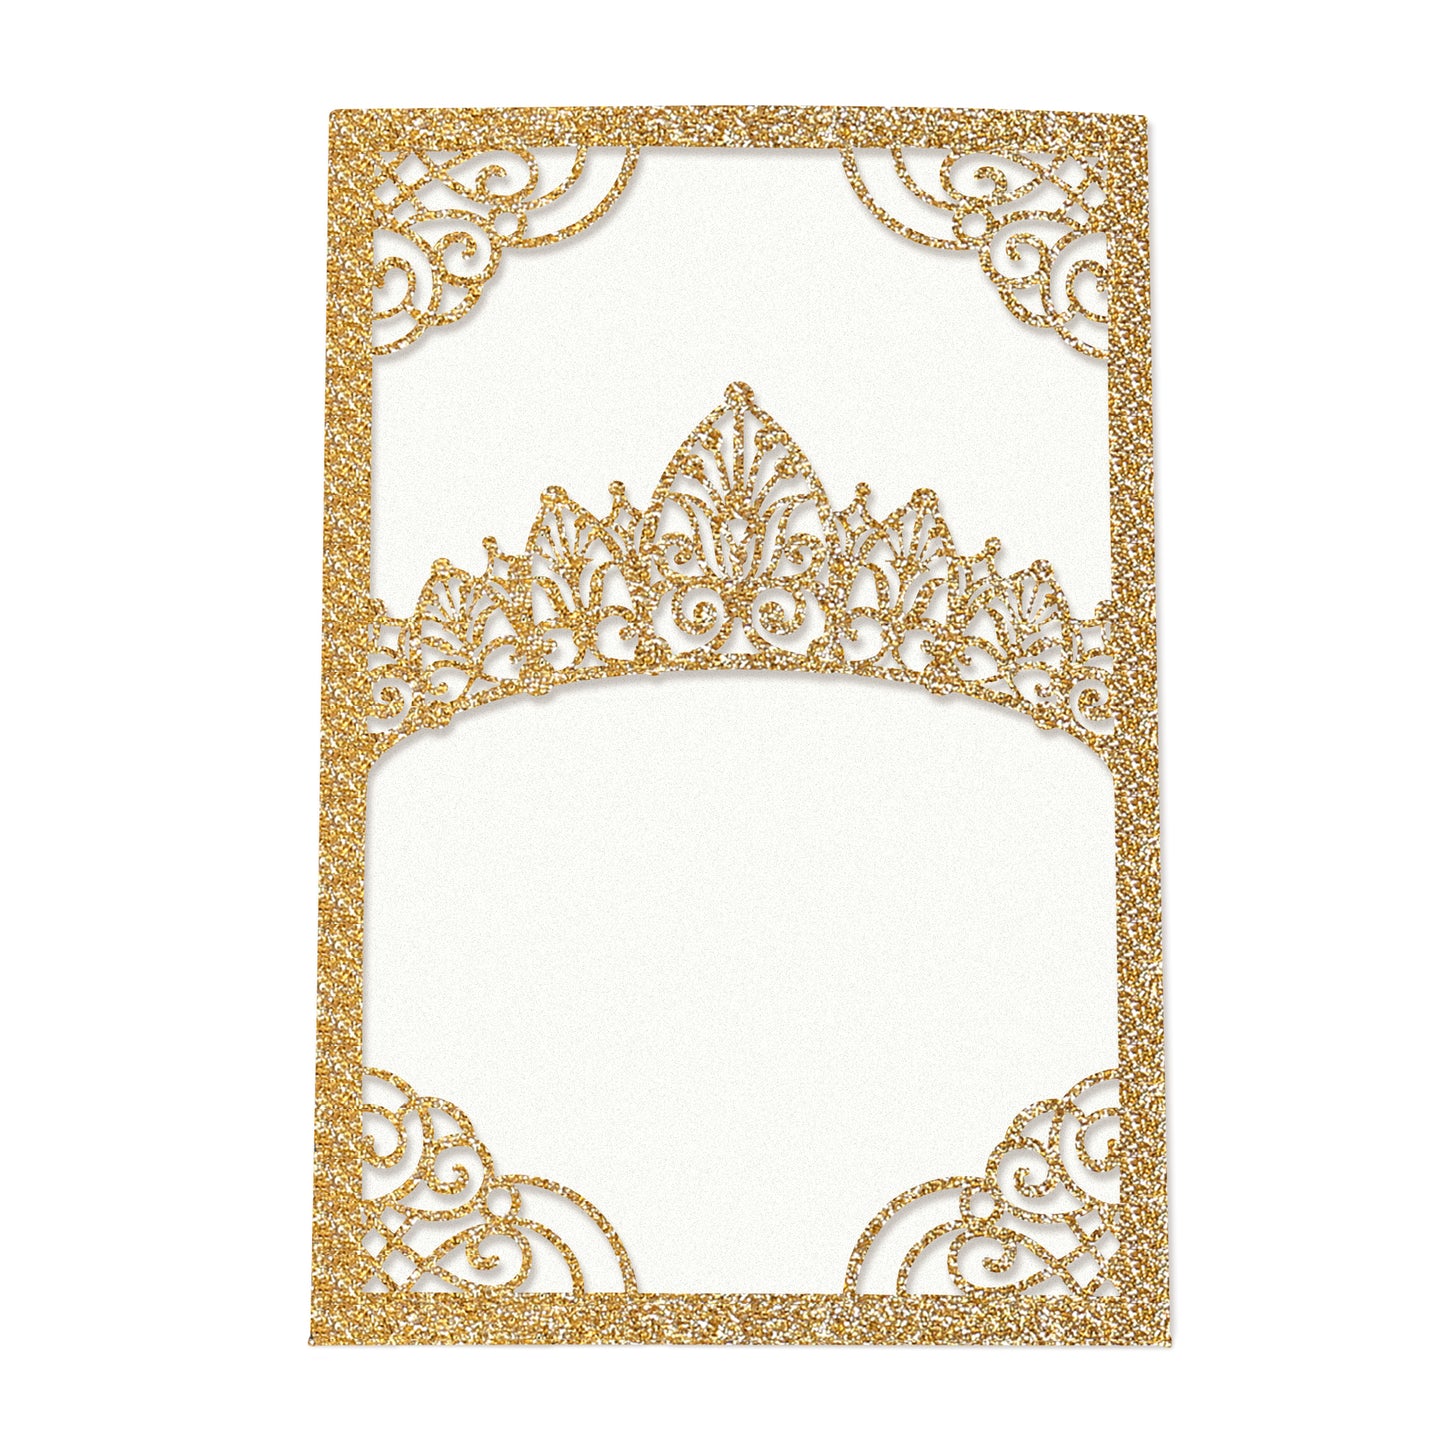 Gold Glitter Invitations Greeting Cards For Quinceanera